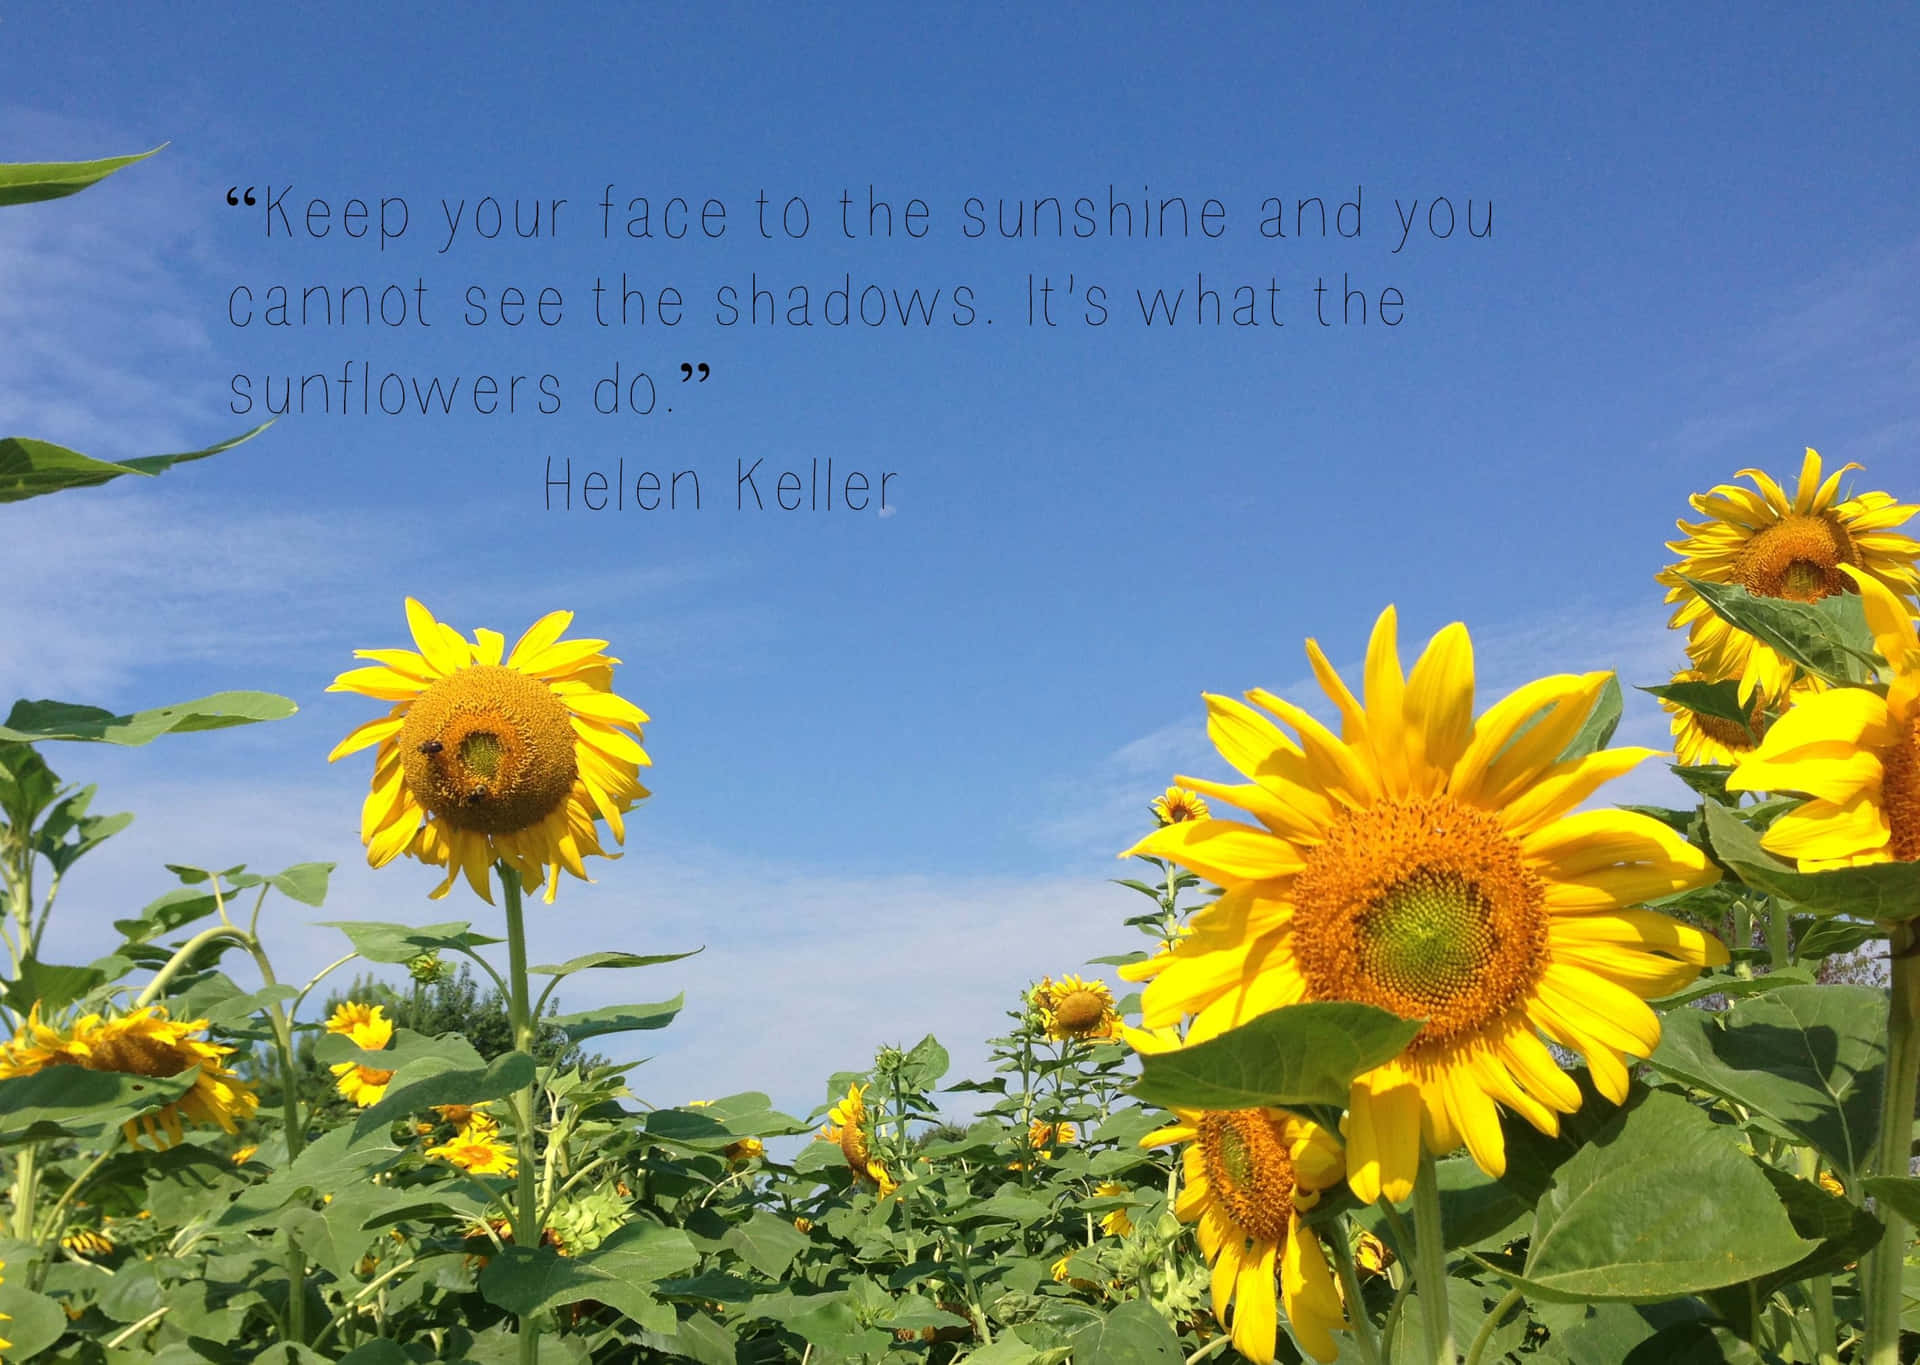 "Life is like a sunflower - always turn towards the light." Wallpaper